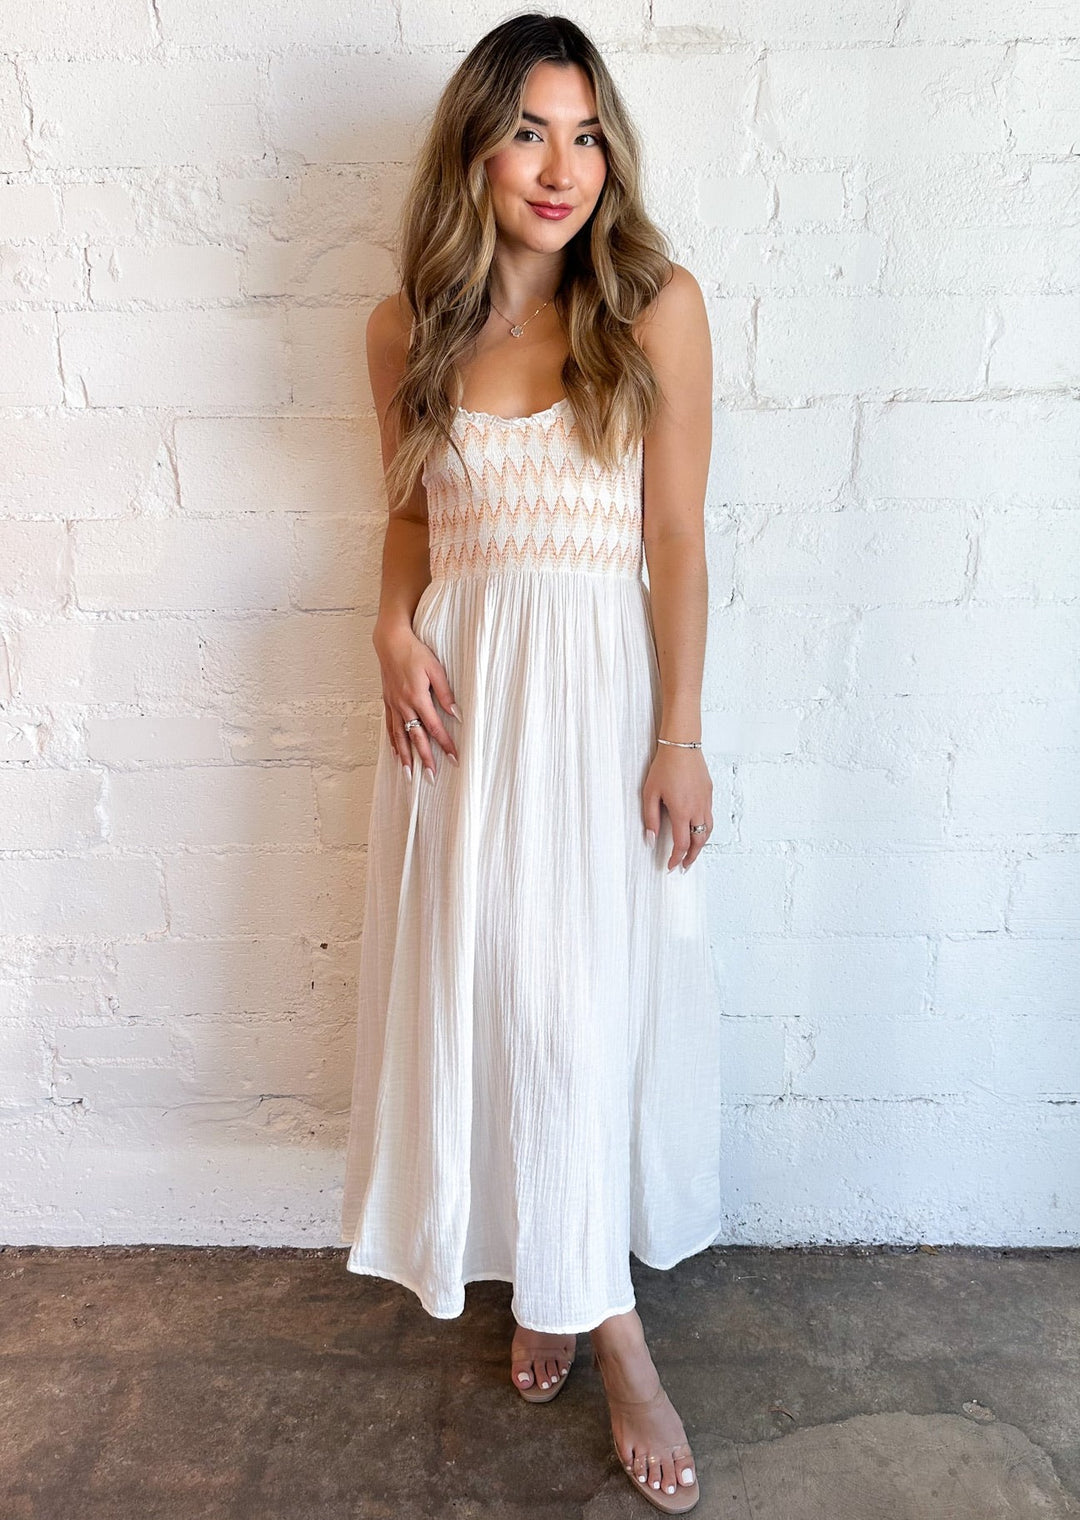 Solid Sweet Nothings Midi Dress, Dresses, Free People, Adeline, dallas boutique, dallas texas, texas boutique, women's boutique dallas, adeline boutique, dallas boutique, trendy boutique, affordable boutique